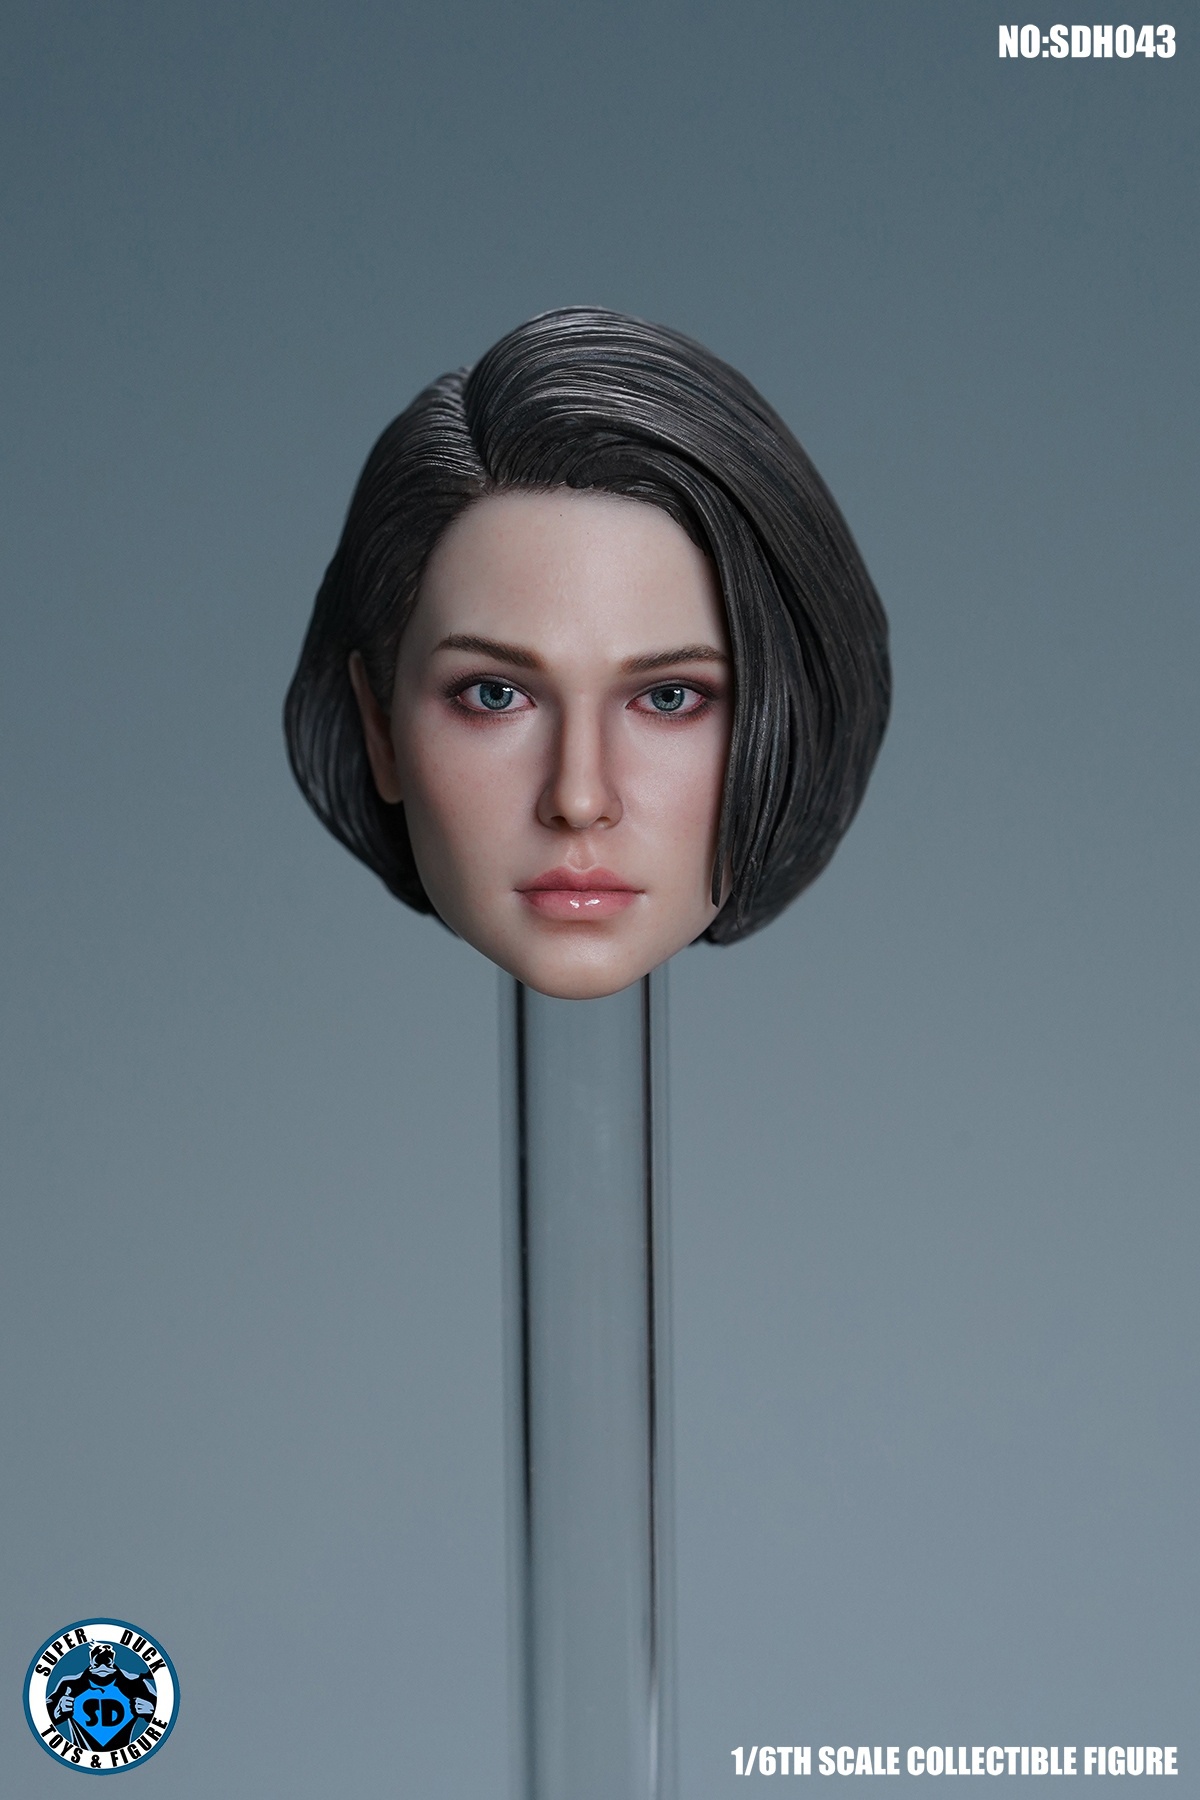 NEW PRODUCT: SUPER DUCK - SDH043 biochemical policewoman head carving 0299